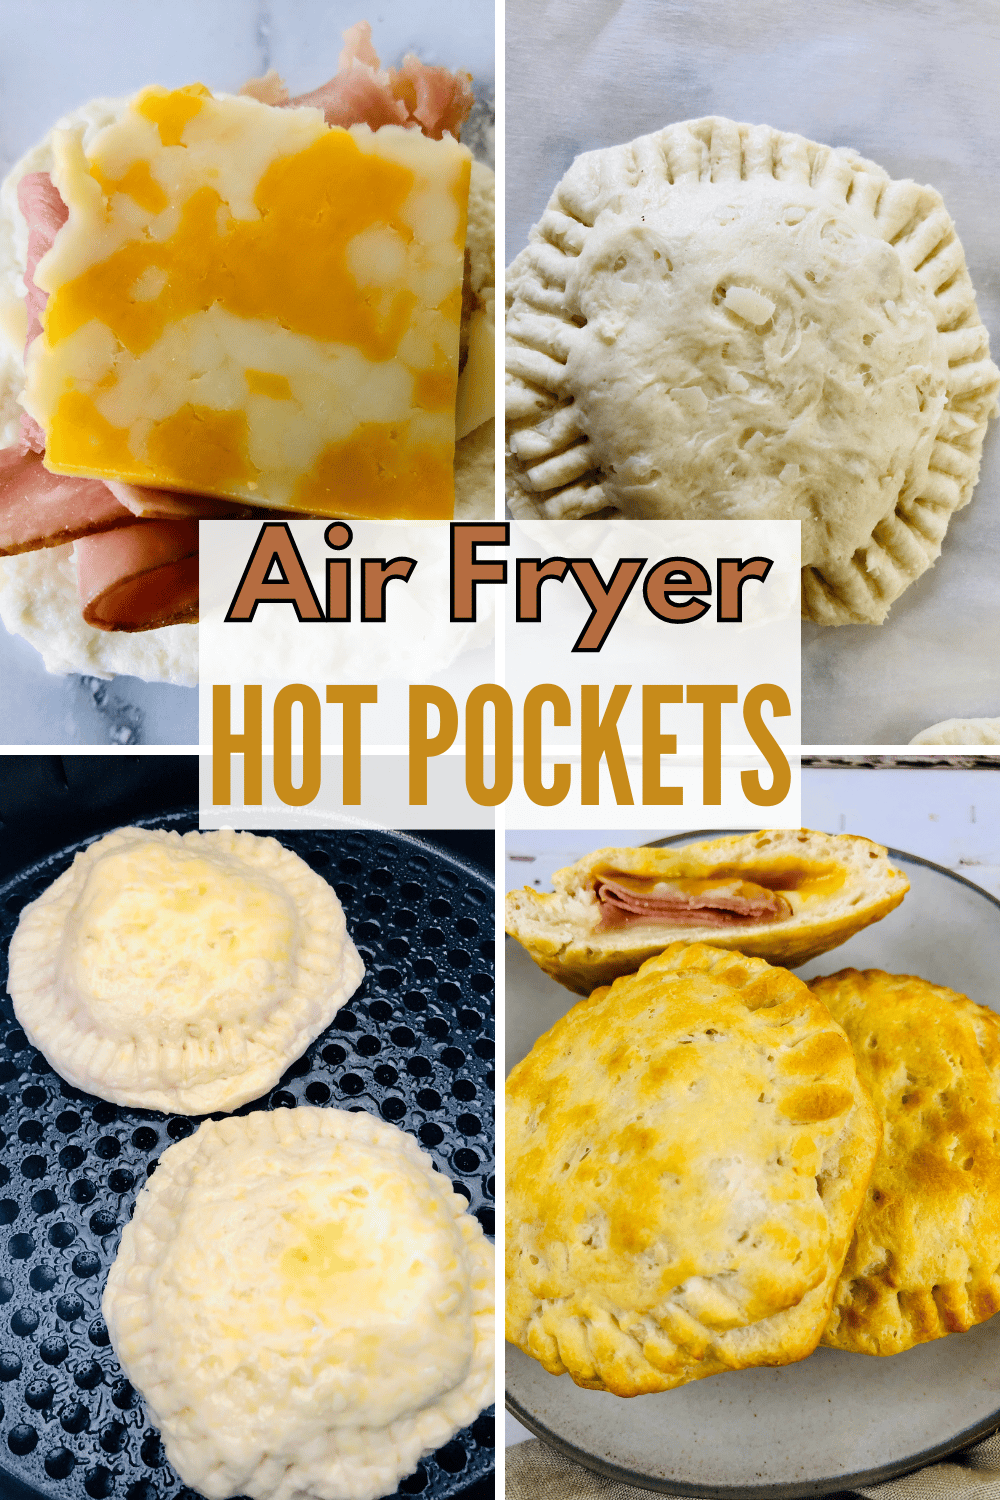 Air Fryer Hot Pockets are so easy to make and only require a few simple ingredients! These are perfect for a quick and easy snack or meal! #airfryer #hotpockets #airfryerhotpockets #recipe via @wondermomwannab